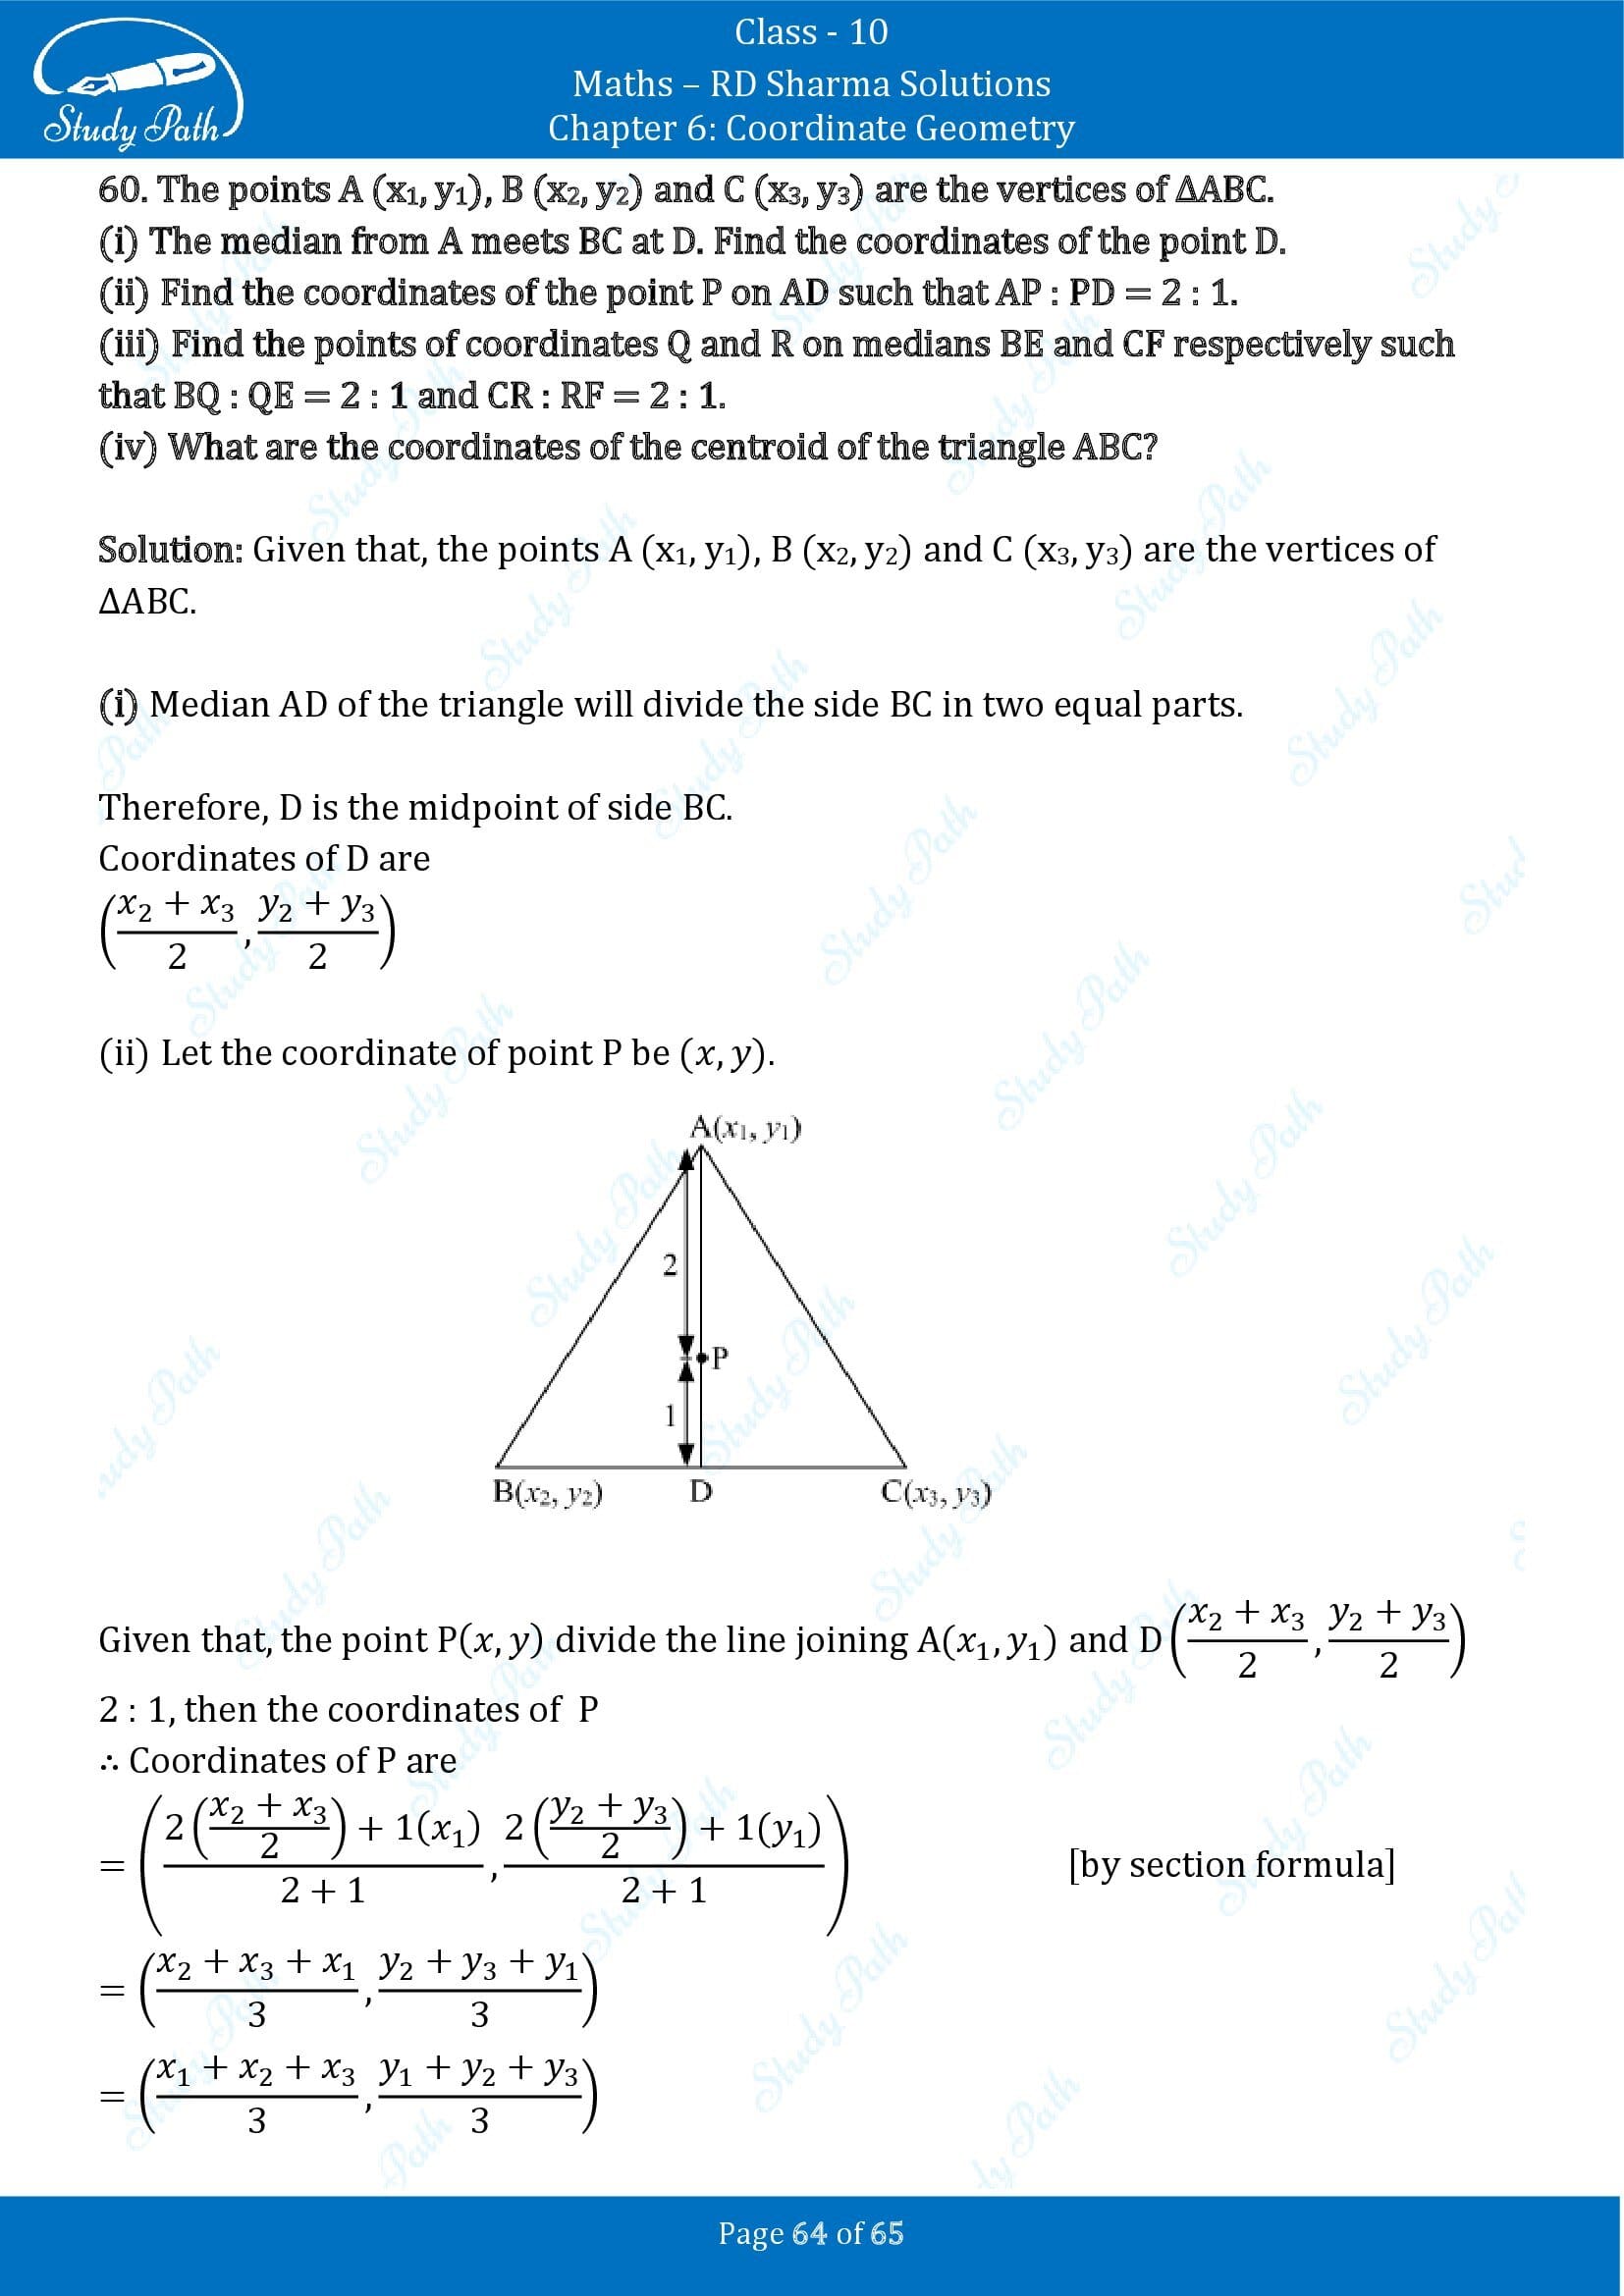 RD Sharma Solutions Class 10 Chapter 6 Coordinate Geometry Exercise 6.3 00064